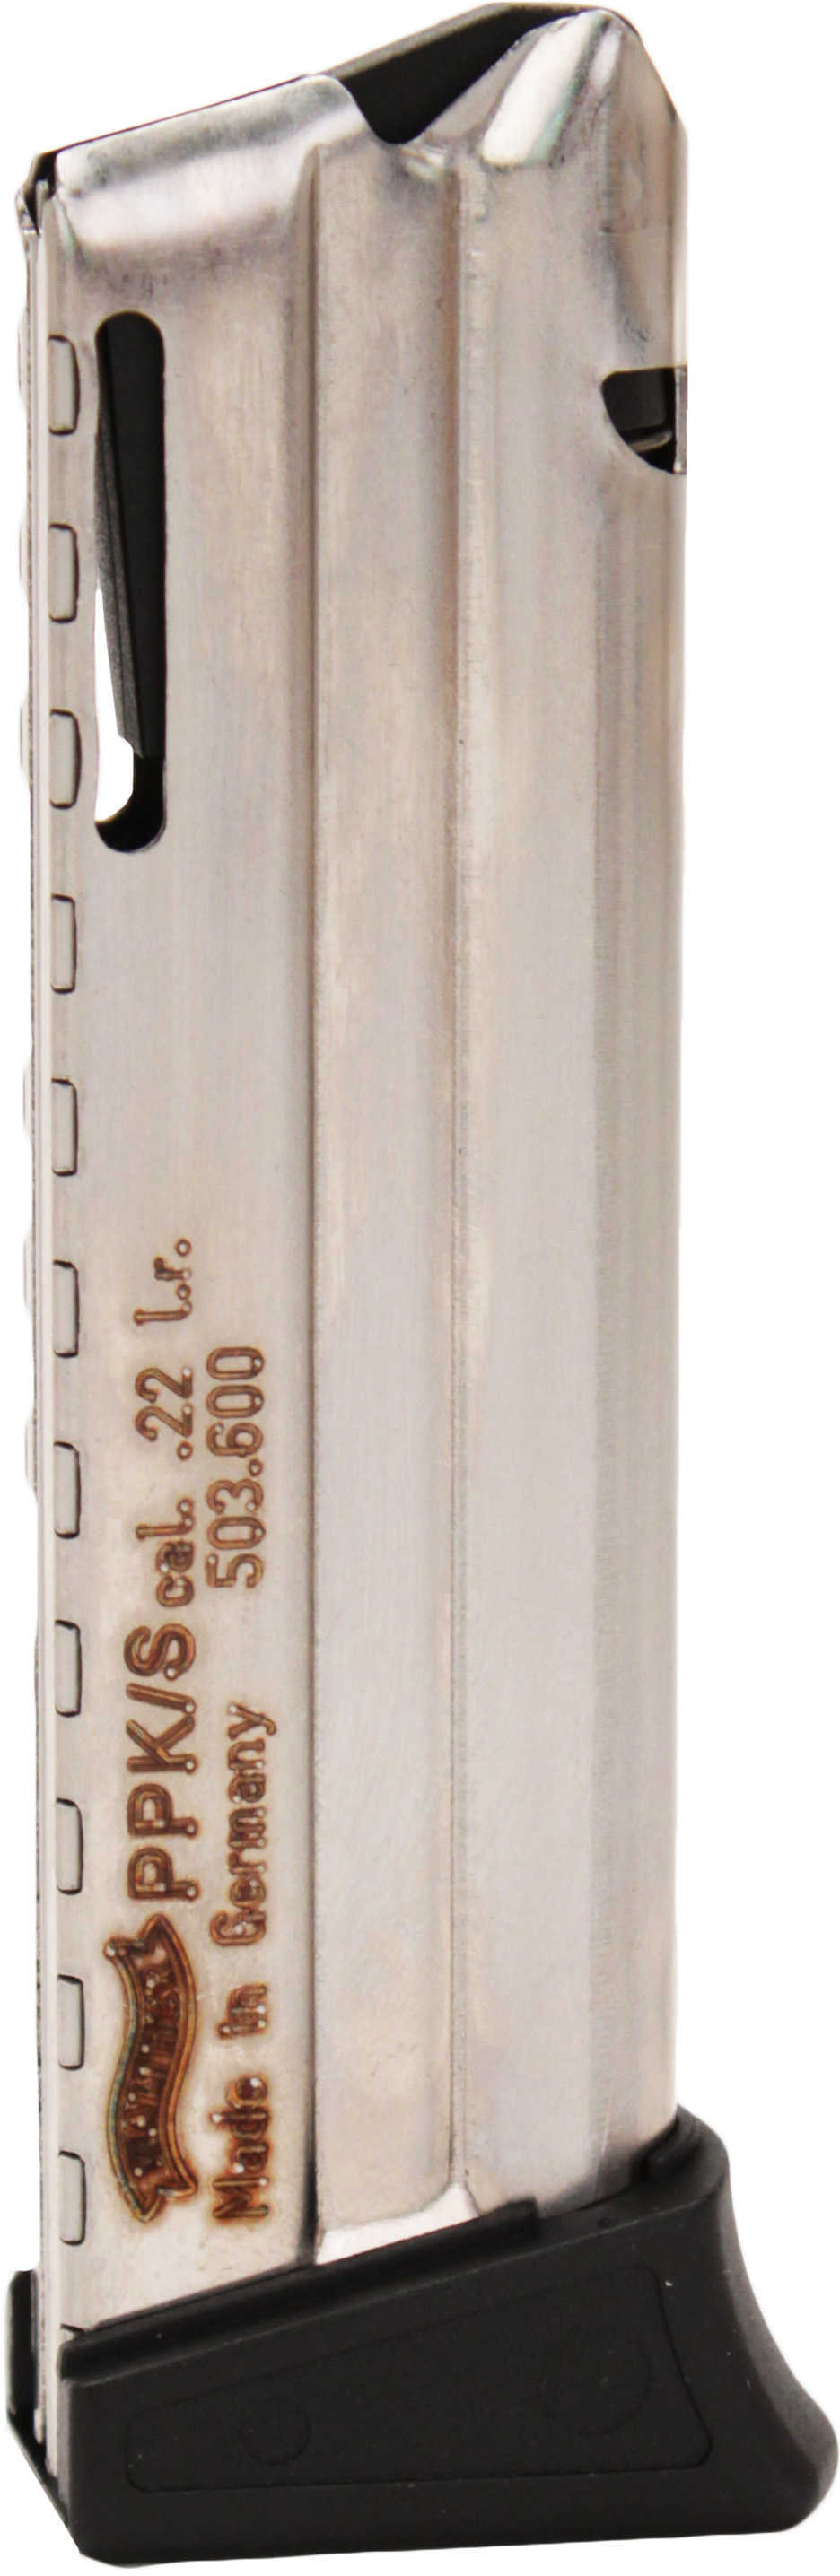 Walther Arms Magazine PPK/S 22LR 10Rd  503600